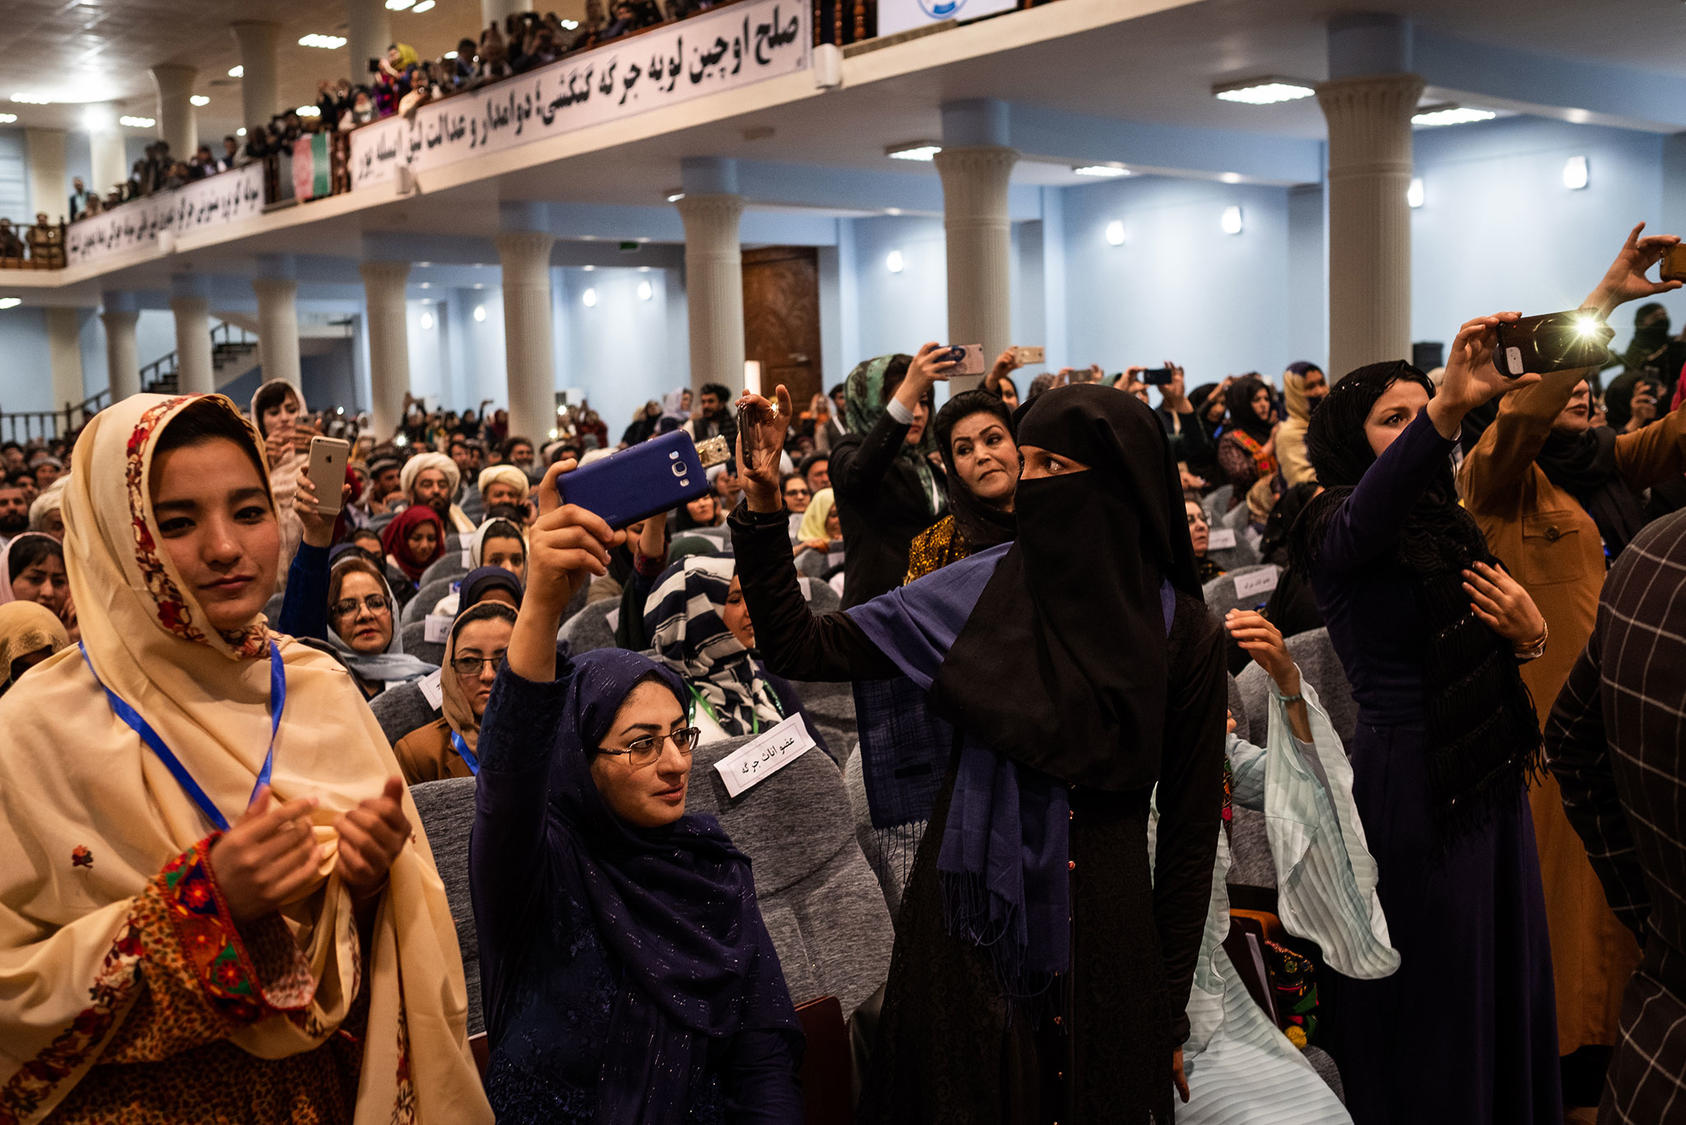 Female delegates during the opening ceremony of Afghanistan's Grand Assembly, April 29, 2019. An expected agreement between the U.S. and the Taliban to smooth future negotiations raises concerns that women may lose some freedoms. (Jim Huylebroek/The New York Times)